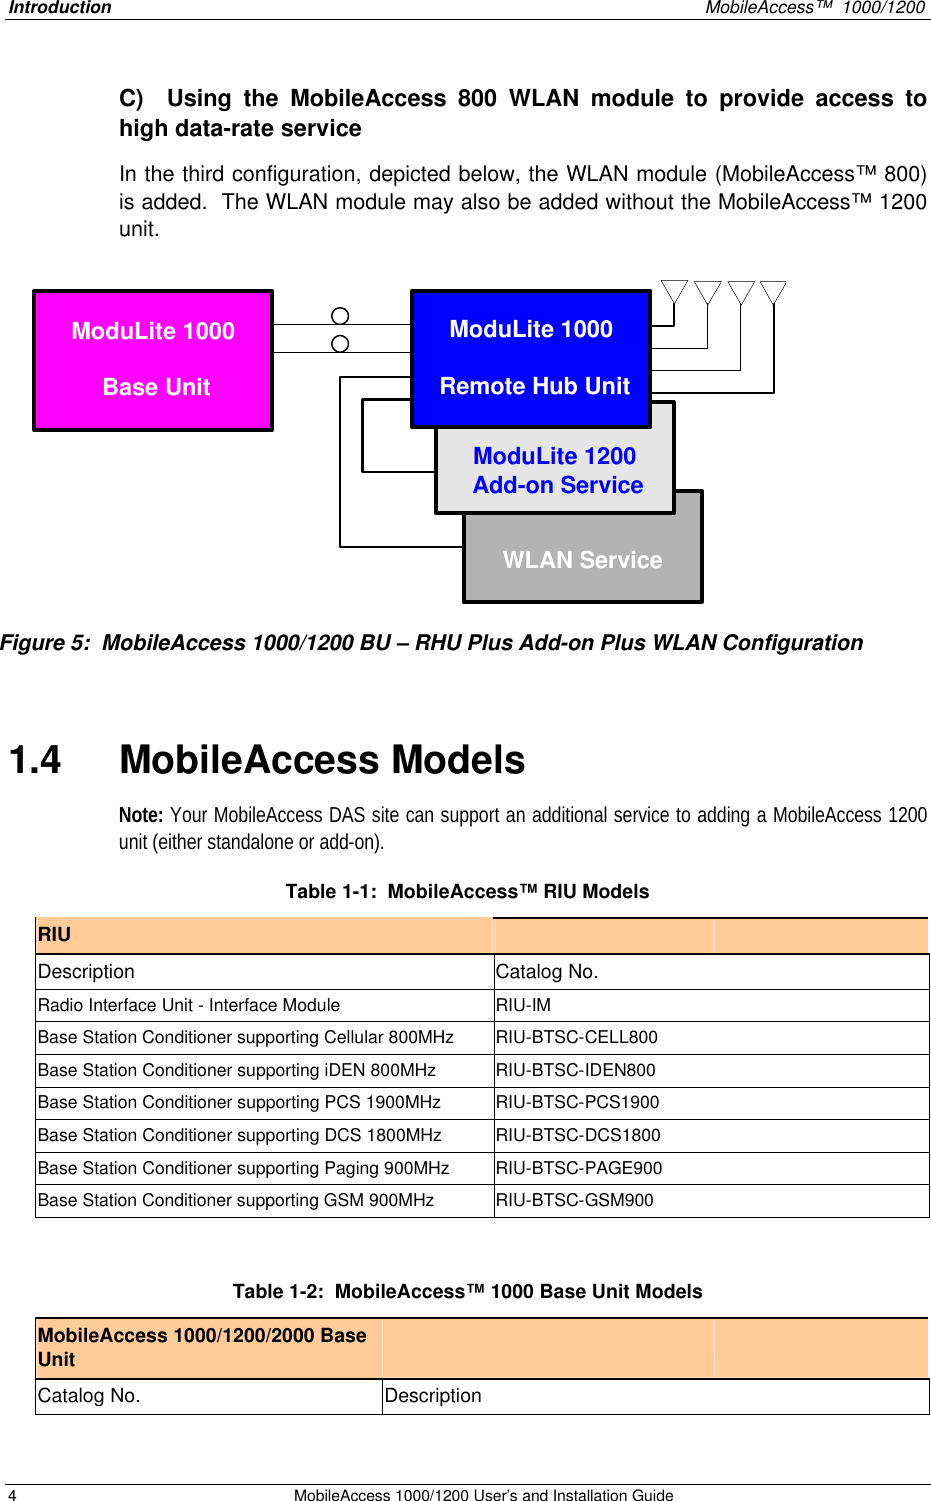 Introduction    MobileAccess™  1000/1200 4 MobileAccess 1000/1200 User’s and Installation Guide  C)  Using the MobileAccess 800 WLAN module to provide access to high data-rate service In the third configuration, depicted below, the WLAN module (MobileAccess™ 800) is added.  The WLAN module may also be added without the MobileAccess™ 1200 unit.  WLAN ServiceModuLite 1200 Add-on ServiceModuLite 1000 Base UnitModuLite 1000 Remote Hub Unit 1.4  MobileAccess Models Note: Your MobileAccess DAS site can support an additional service to adding a MobileAccess 1200 unit (either standalone or add-on). Table 1-1:  MobileAccess™ RIU Models  RIU      Description Catalog No. Radio Interface Unit - Interface Module RIU-IM Base Station Conditioner supporting Cellular 800MHz RIU-BTSC-CELL800 Base Station Conditioner supporting iDEN 800MHz RIU-BTSC-IDEN800 Base Station Conditioner supporting PCS 1900MHz RIU-BTSC-PCS1900 Base Station Conditioner supporting DCS 1800MHz RIU-BTSC-DCS1800 Base Station Conditioner supporting Paging 900MHz RIU-BTSC-PAGE900 Base Station Conditioner supporting GSM 900MHz RIU-BTSC-GSM900  Table 1-2:  MobileAccess™ 1000 Base Unit Models  MobileAccess 1000/1200/2000 Base Unit      Catalog No. Description Figure 5:  MobileAccess 1000/1200 BU – RHU Plus Add-on Plus WLAN Configuration 